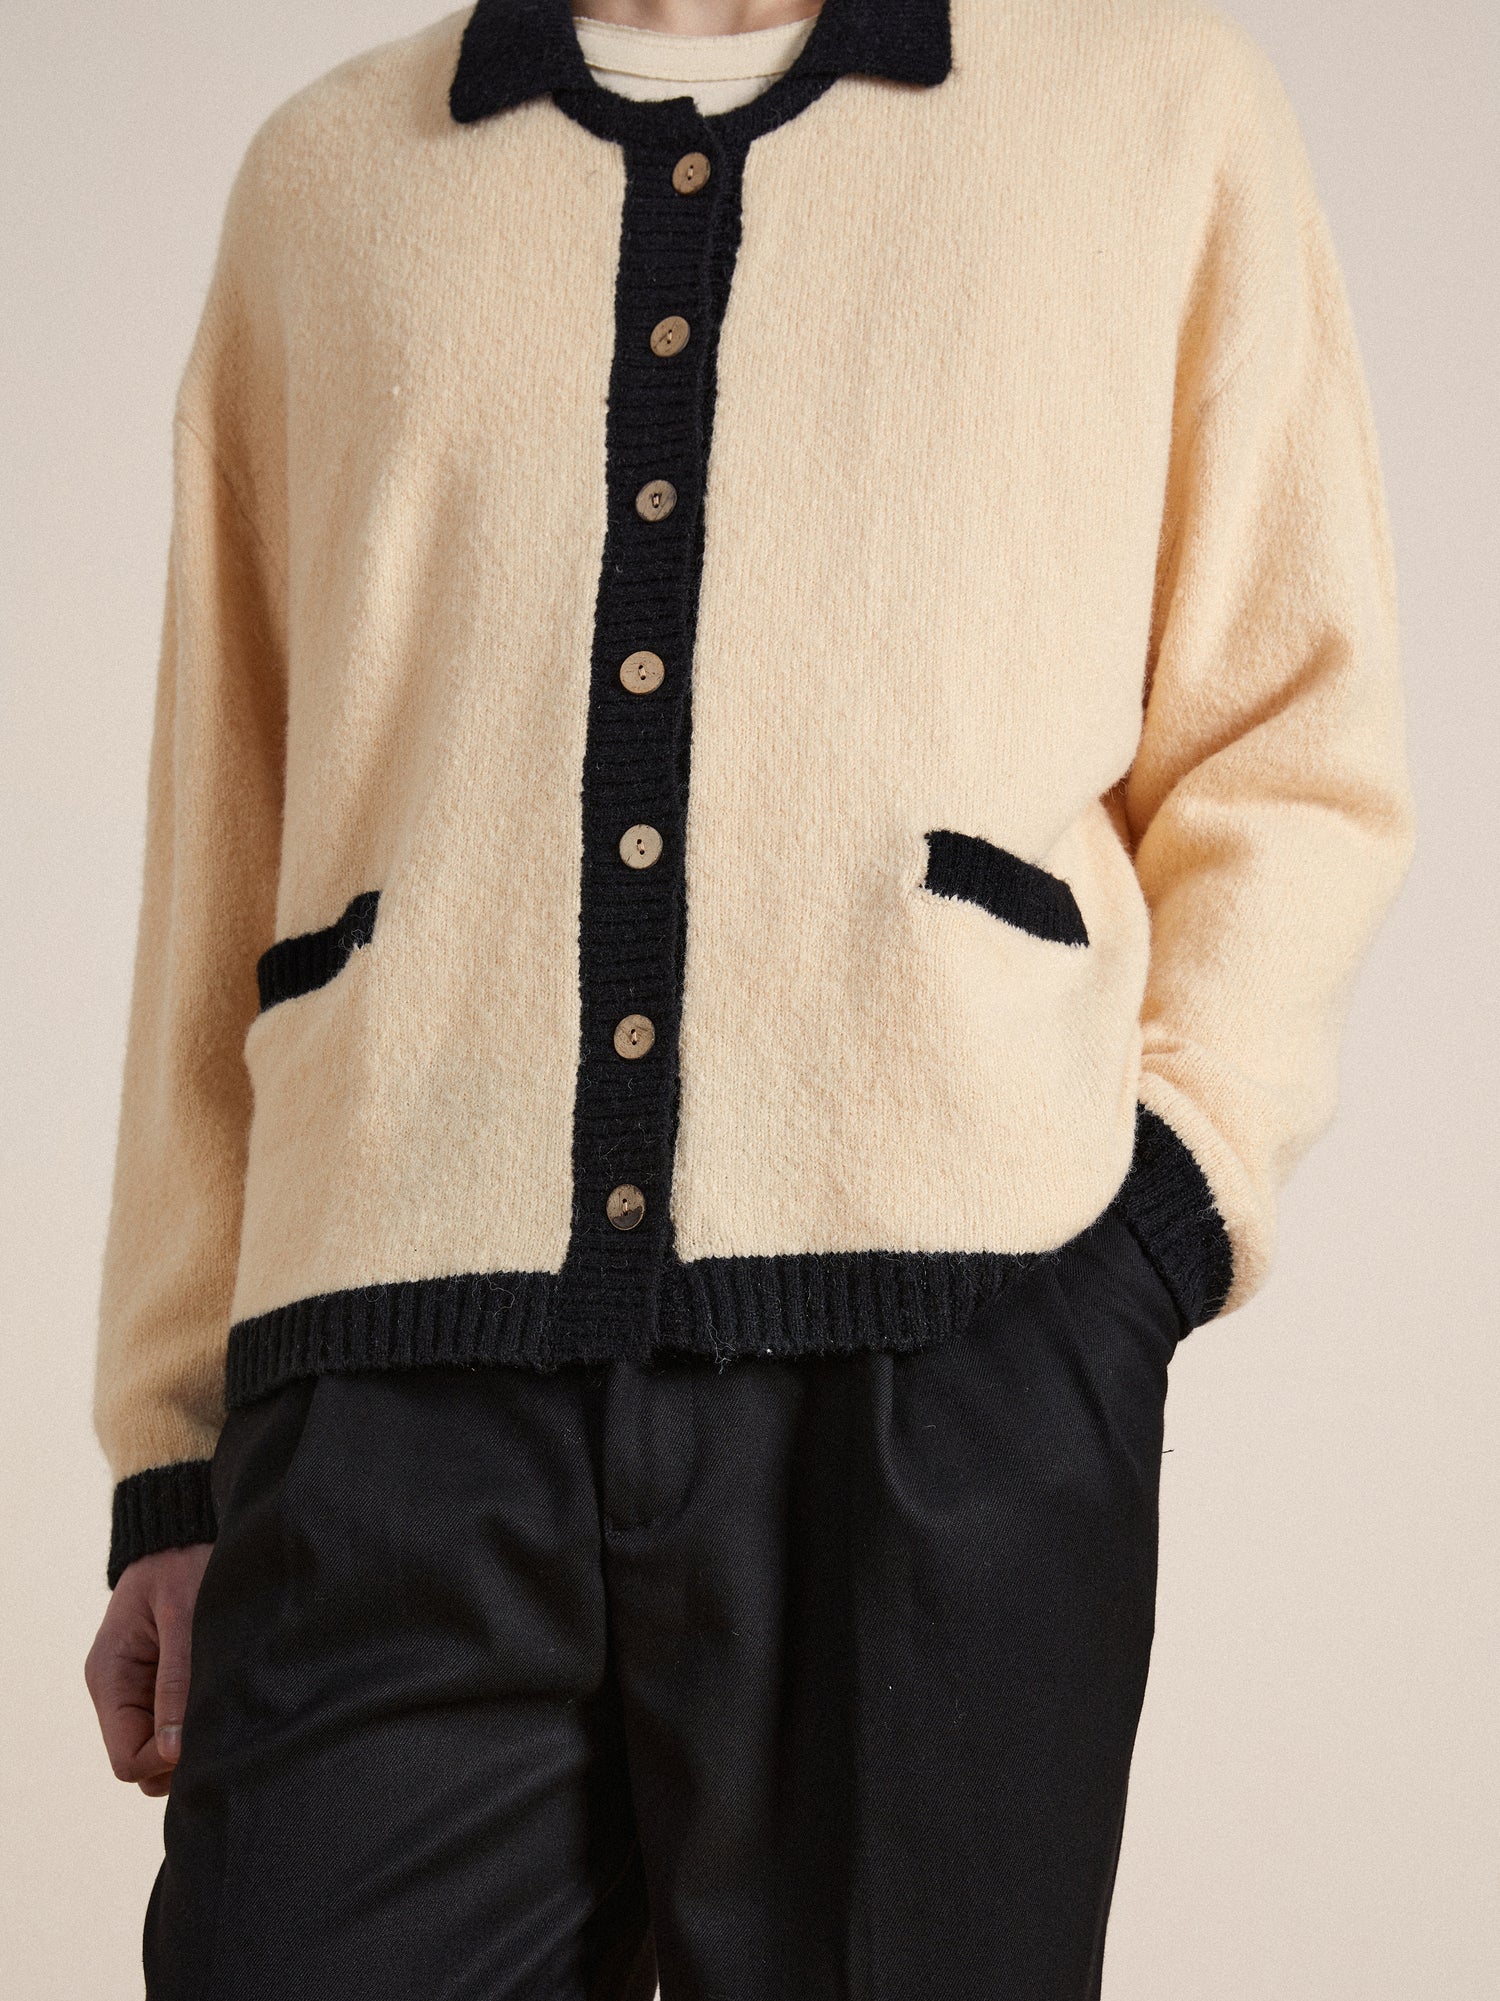 A man wearing a luxurious fuzzy textured fabric Found Sima Contrast Collar Knitted Cardigan with wooden buttons and pants.